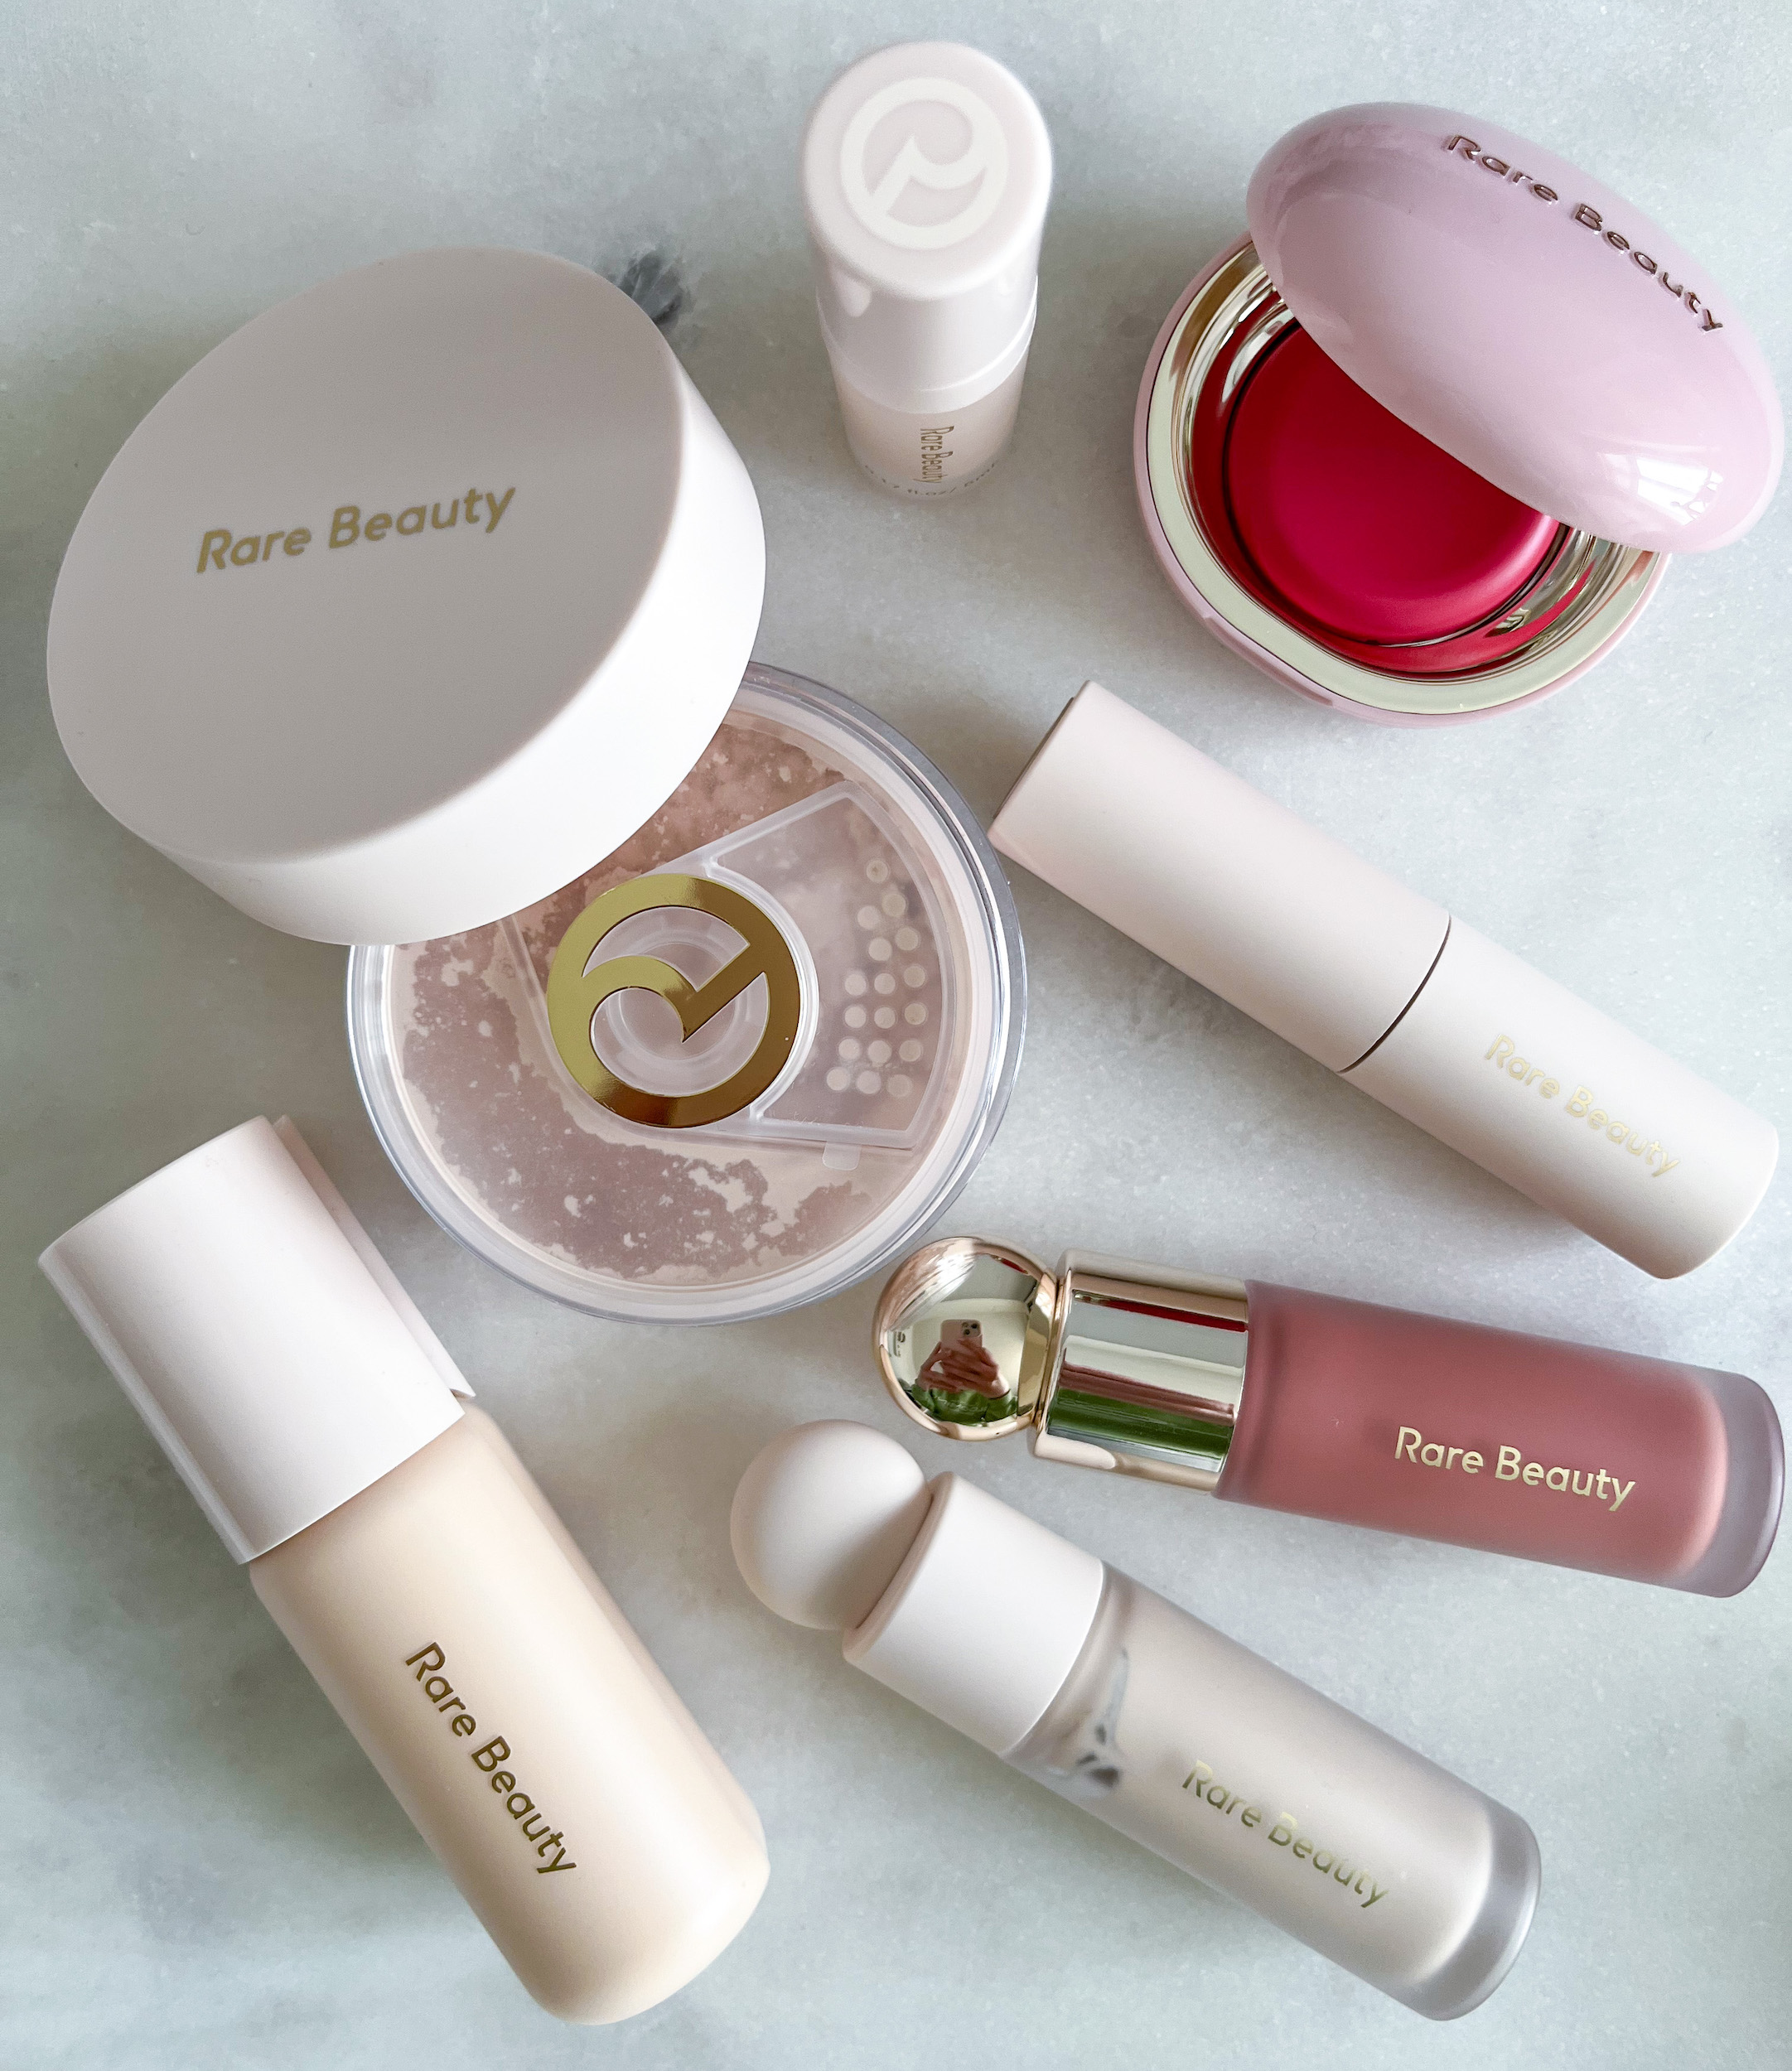 Rare Beauty Review: Which Products Are Worth The Spend? - The Summer Study